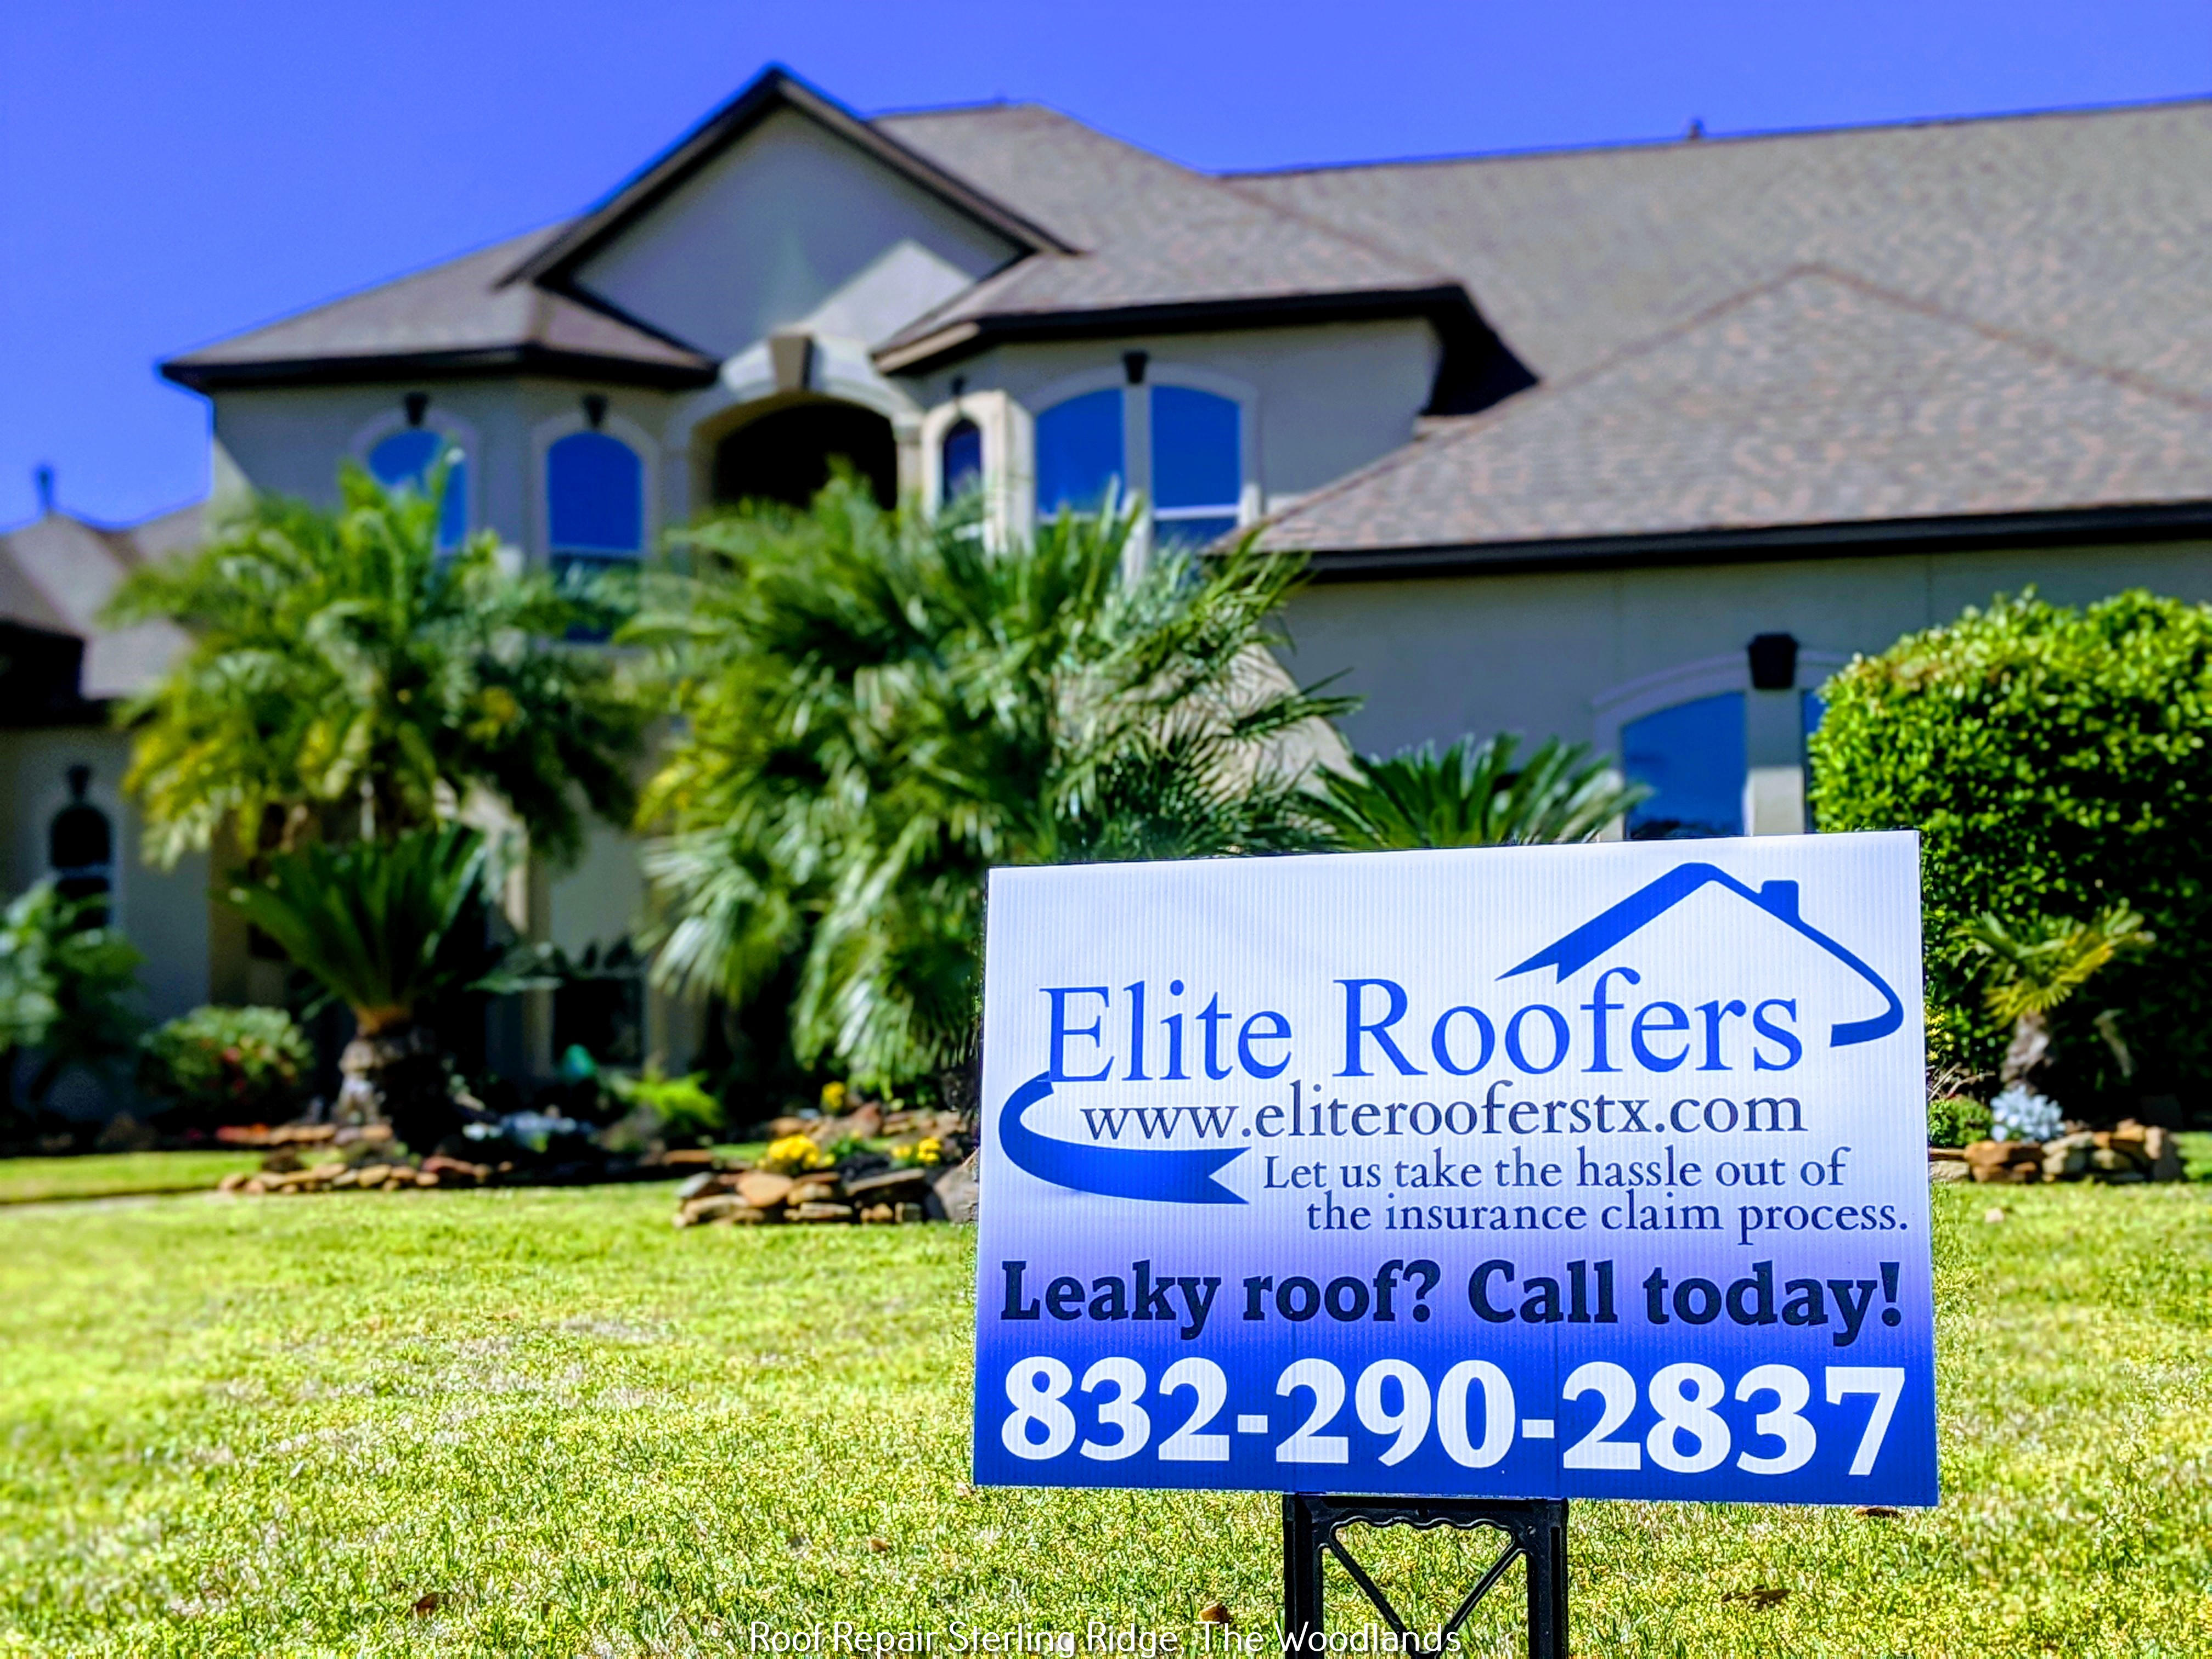 The Woodlands, TX, is home to exceptional roofing professionals